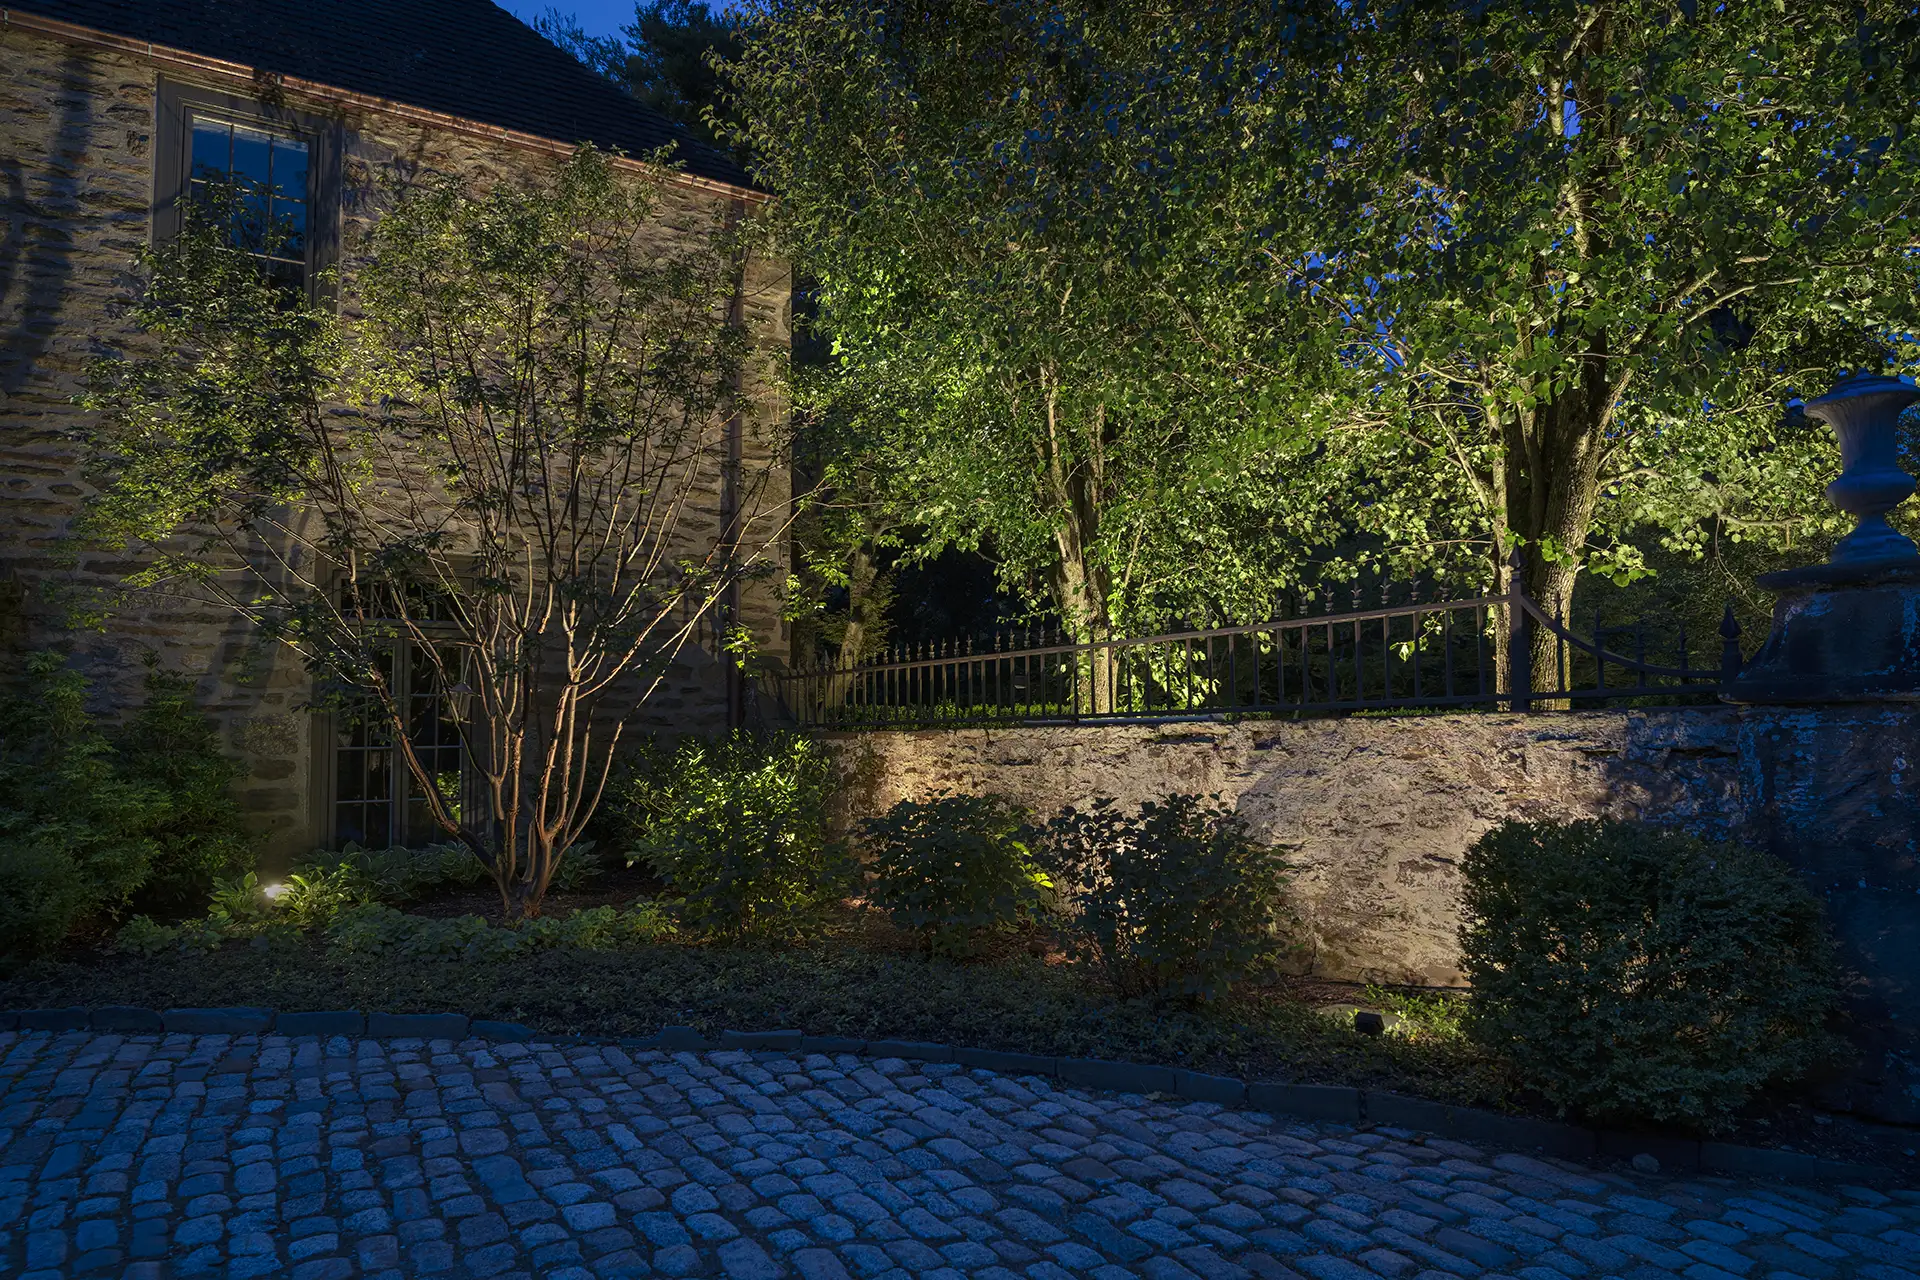 Main Line image 7 Lighthouse Outdoor Lighting and Audio West Chester PA